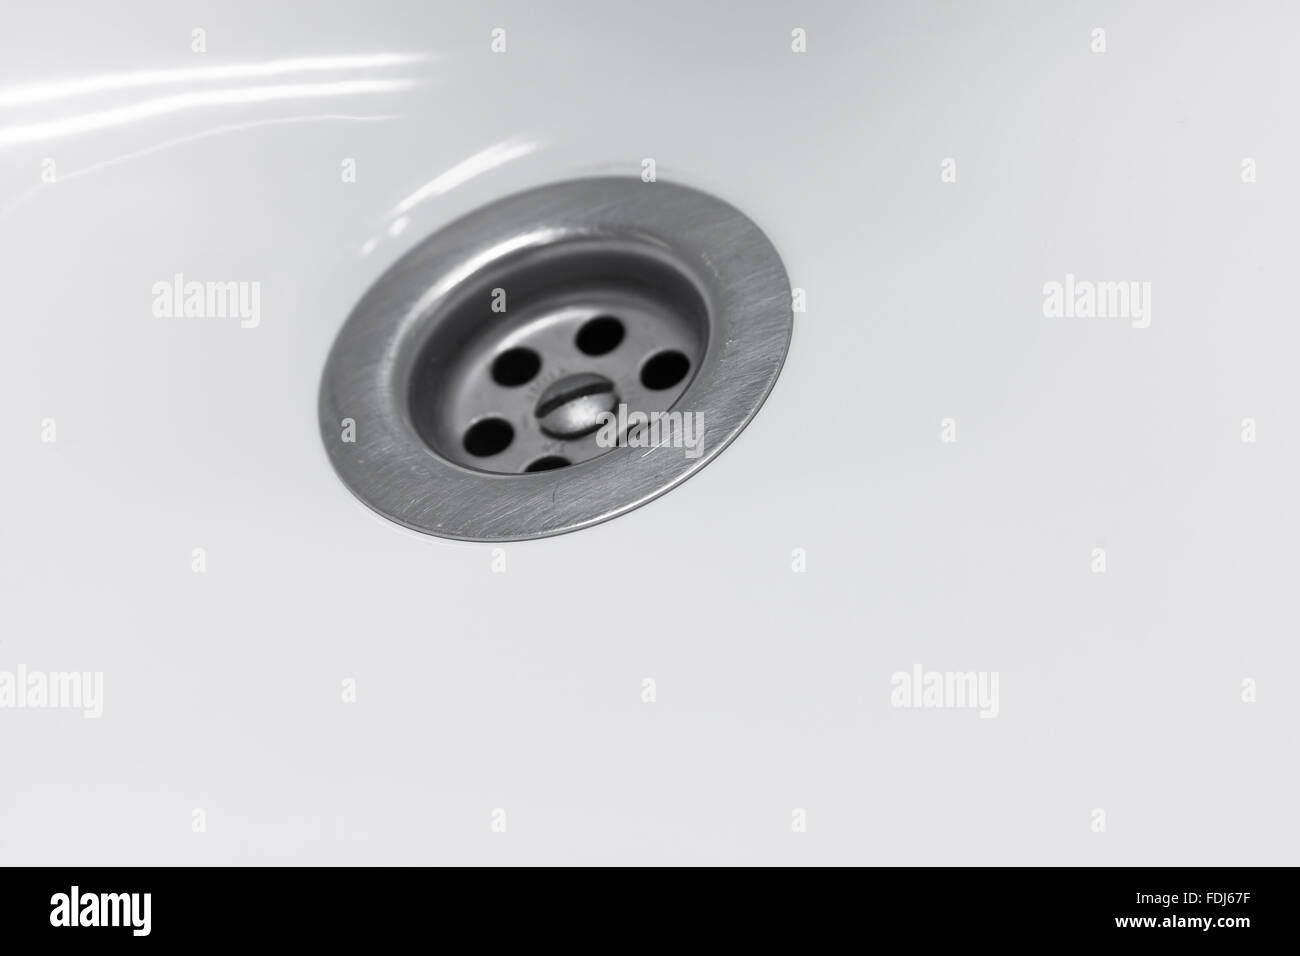 Standard round drain hole in white domestic sink, macro photo with selective focus Stock Photo